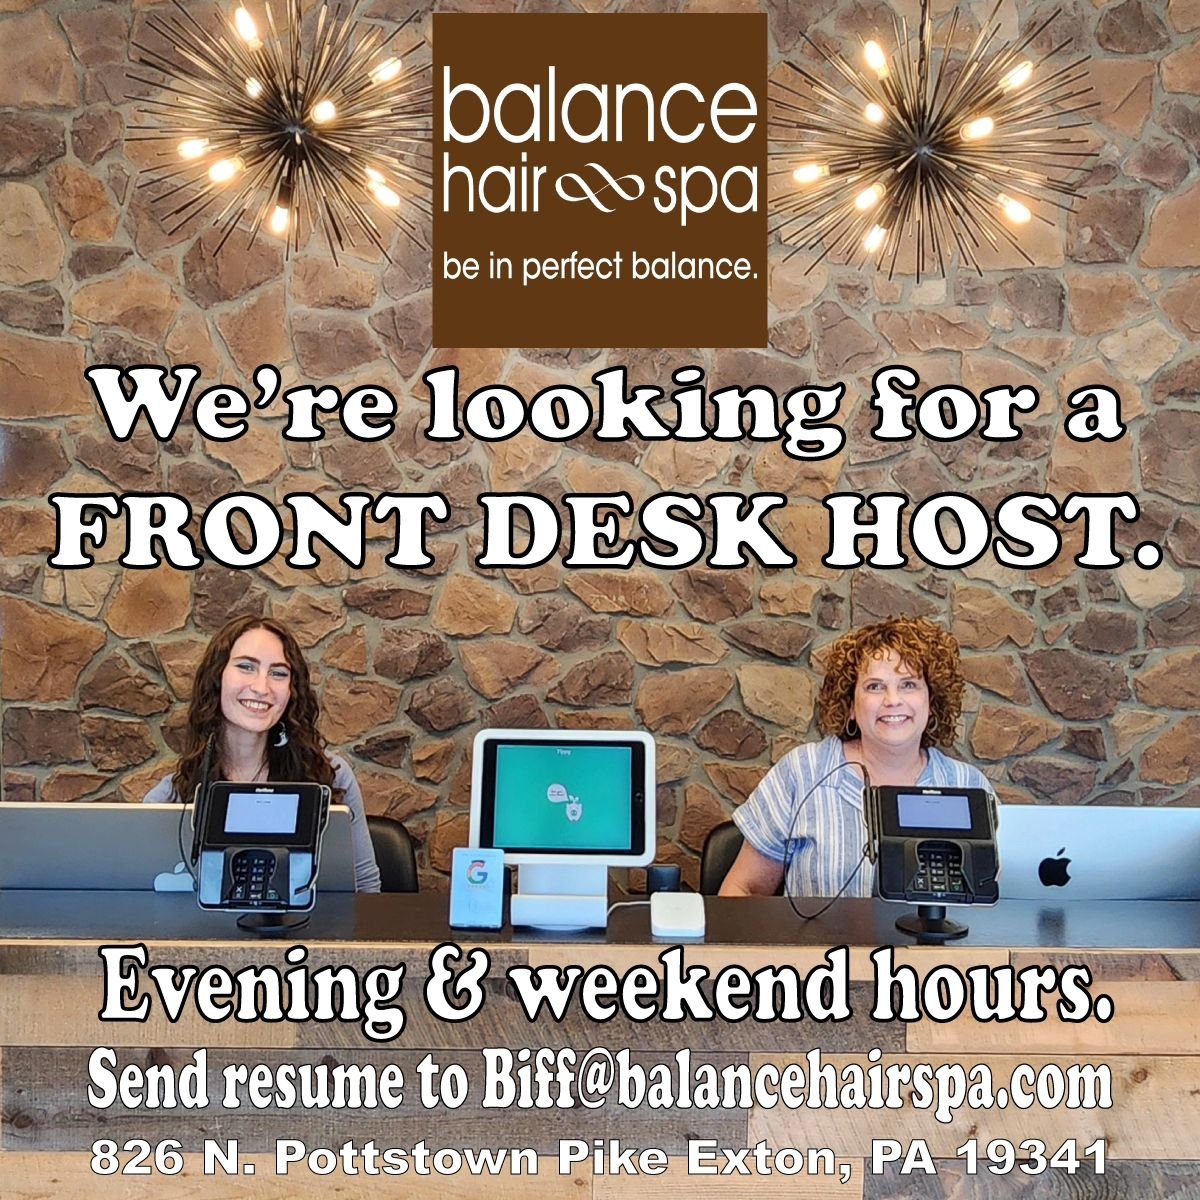 We're looking for a Front Desk Host for the evenings &amp; Saturdays. If you or anyone you know is looking for a part-time job with good pay and wants to work with a fun team of beauty professionals, please send a resume to biff@balancehairspa.com. W